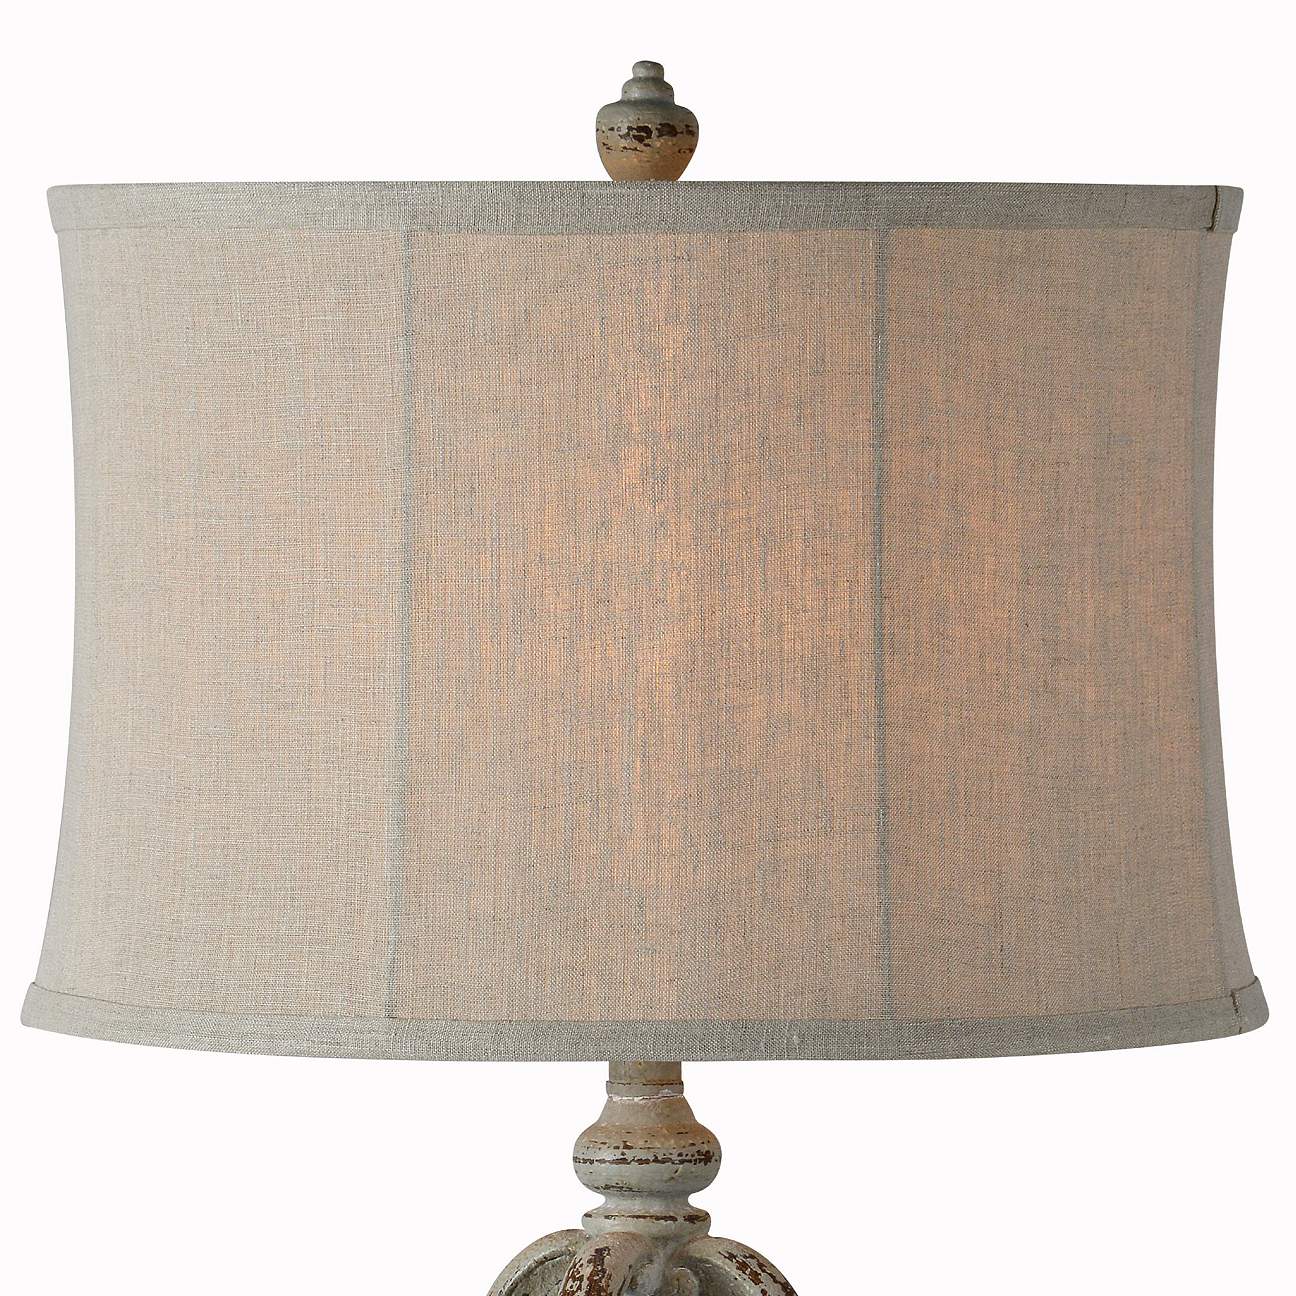 Tanner Distressed Light Gray Table Lamps Set of 2 - #601N0 | Lamps Plus